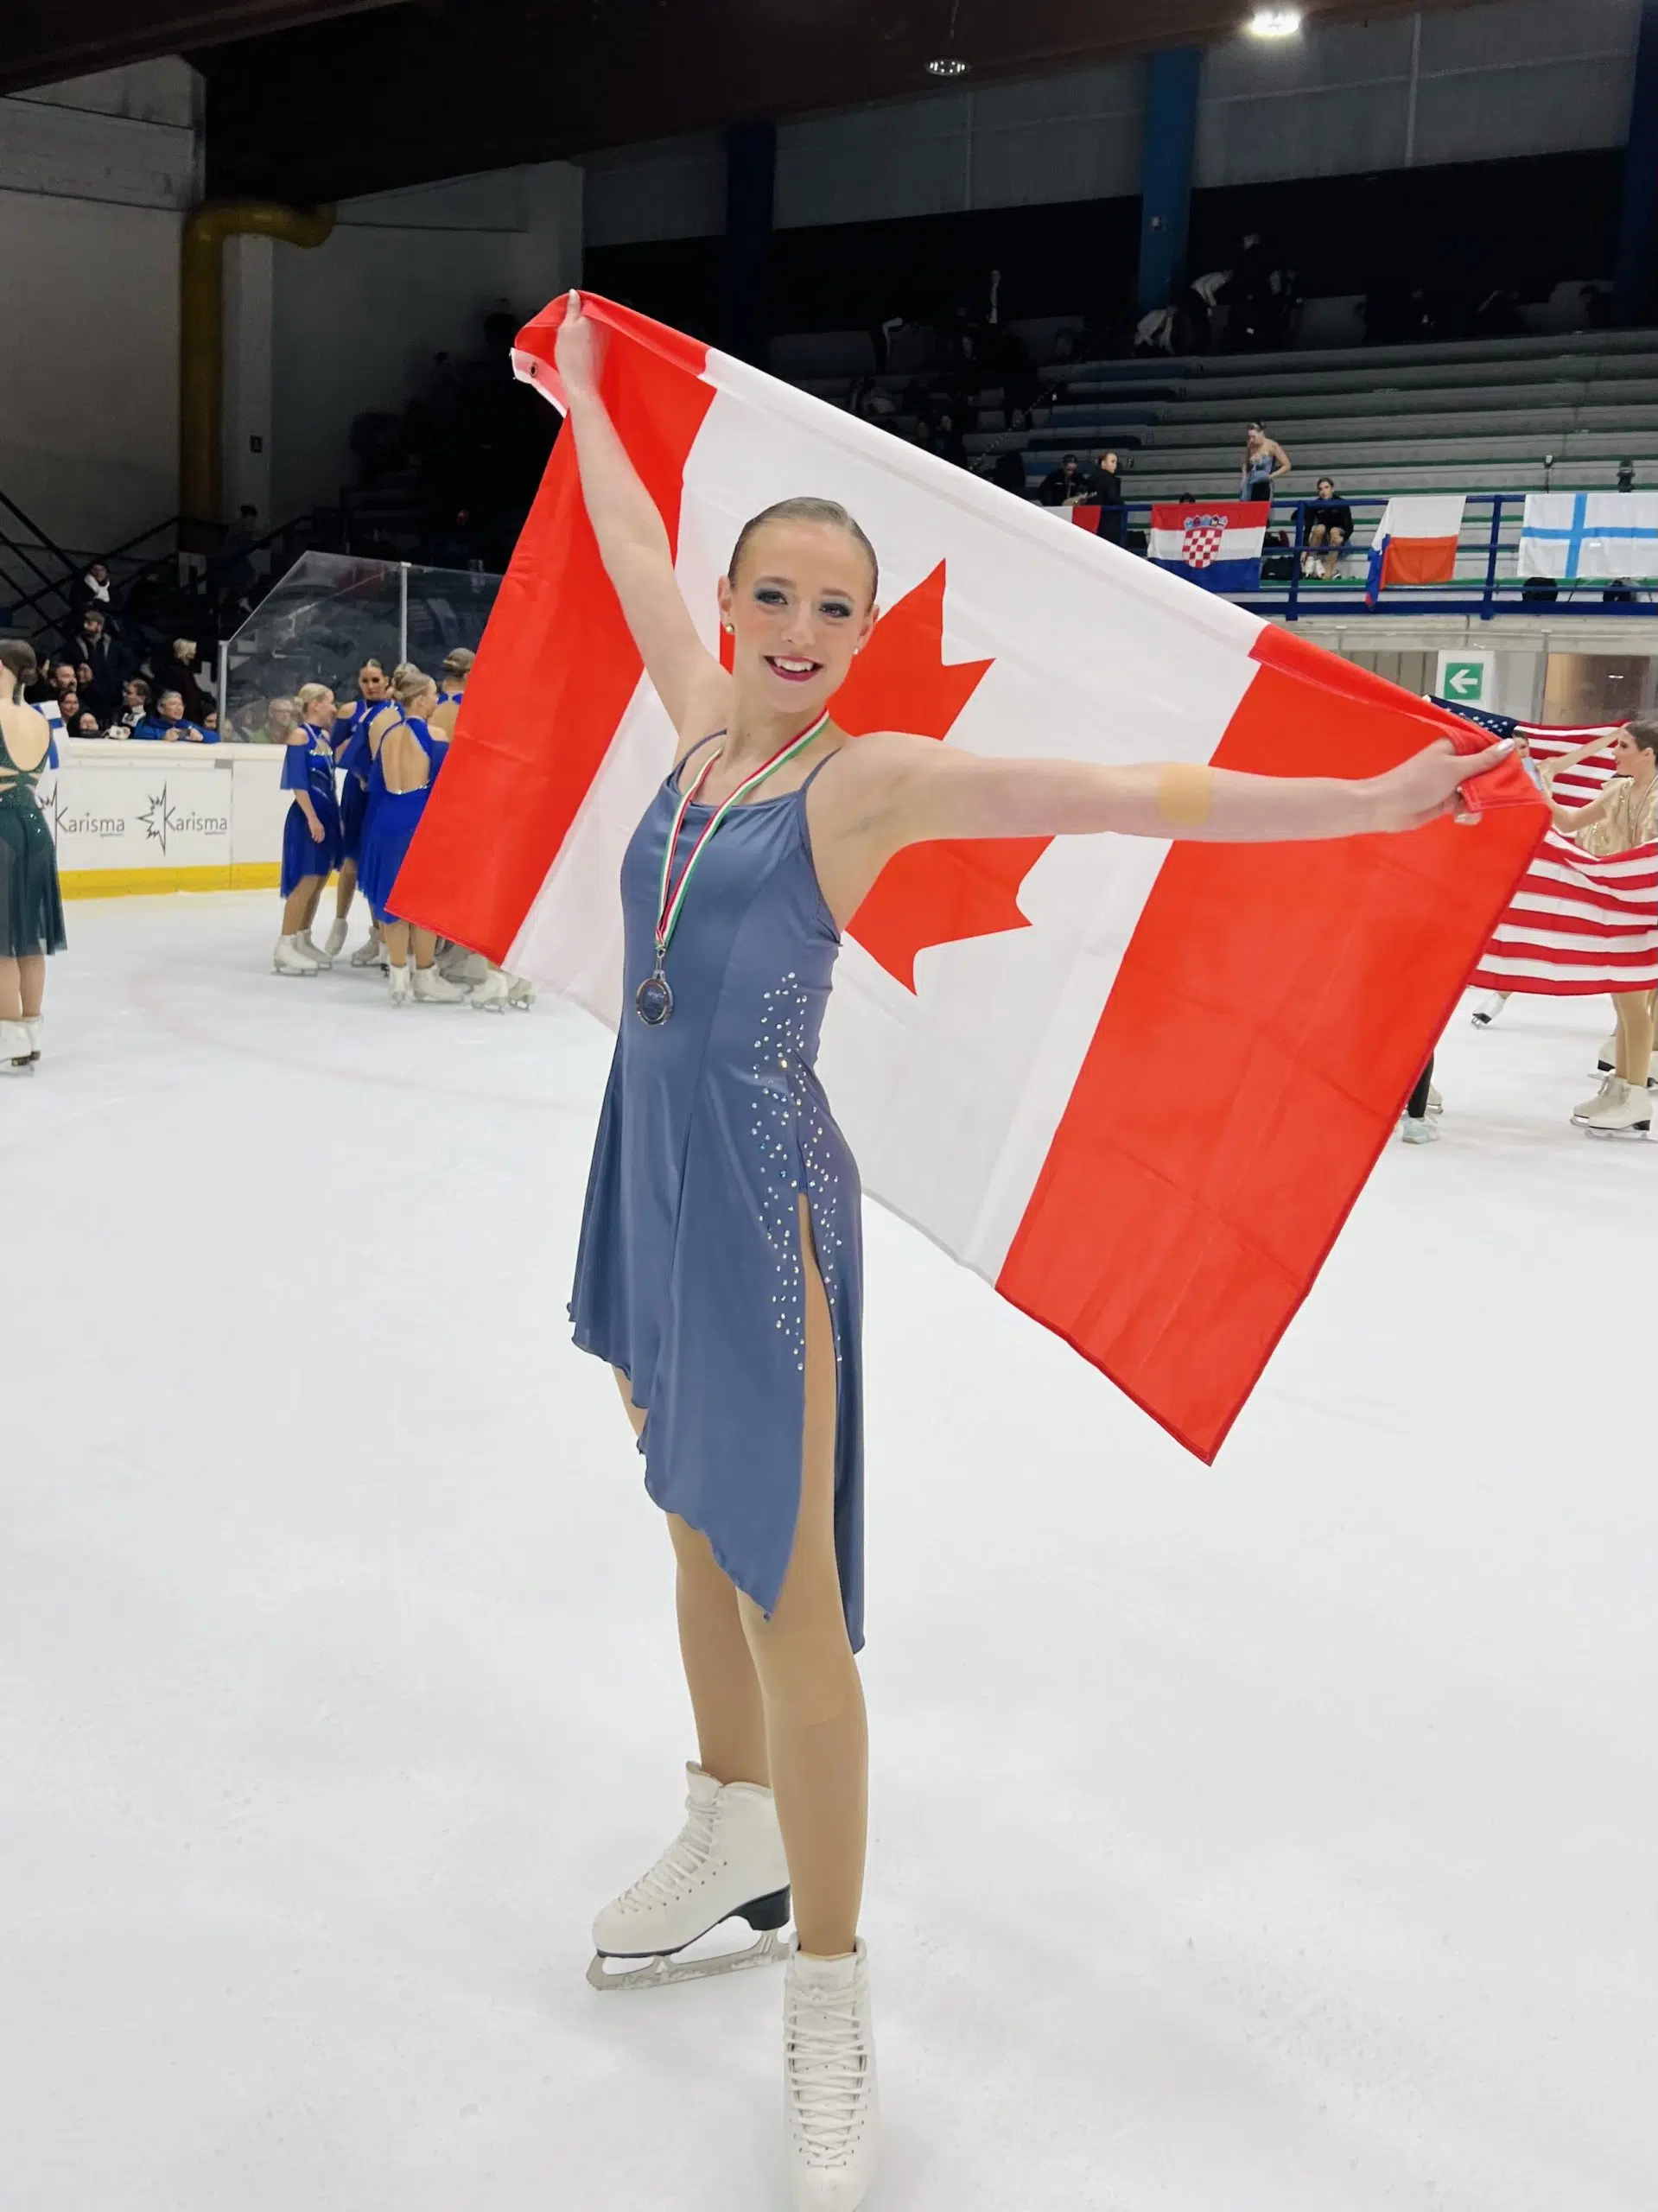 Frankford's Choinard and Nexxice earn Bronze at Spring Cup